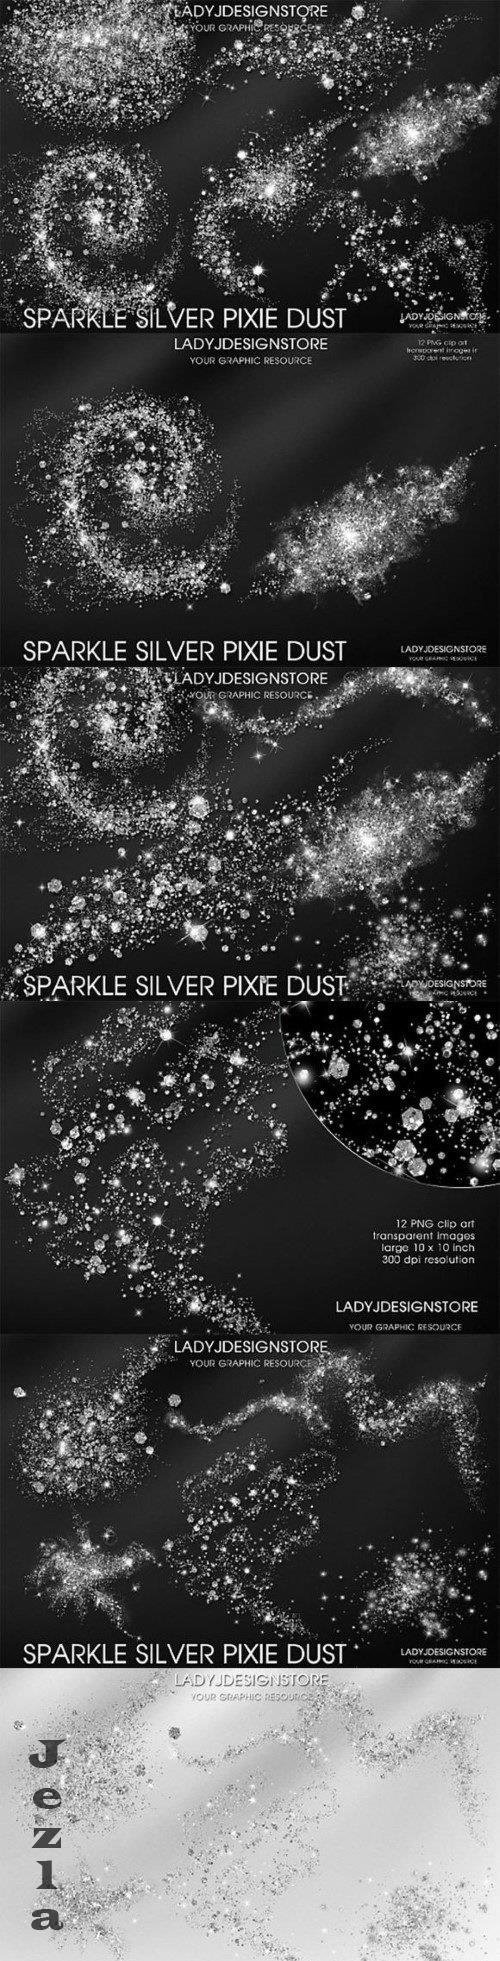 Silver Pixie Dust Overlays Clipart